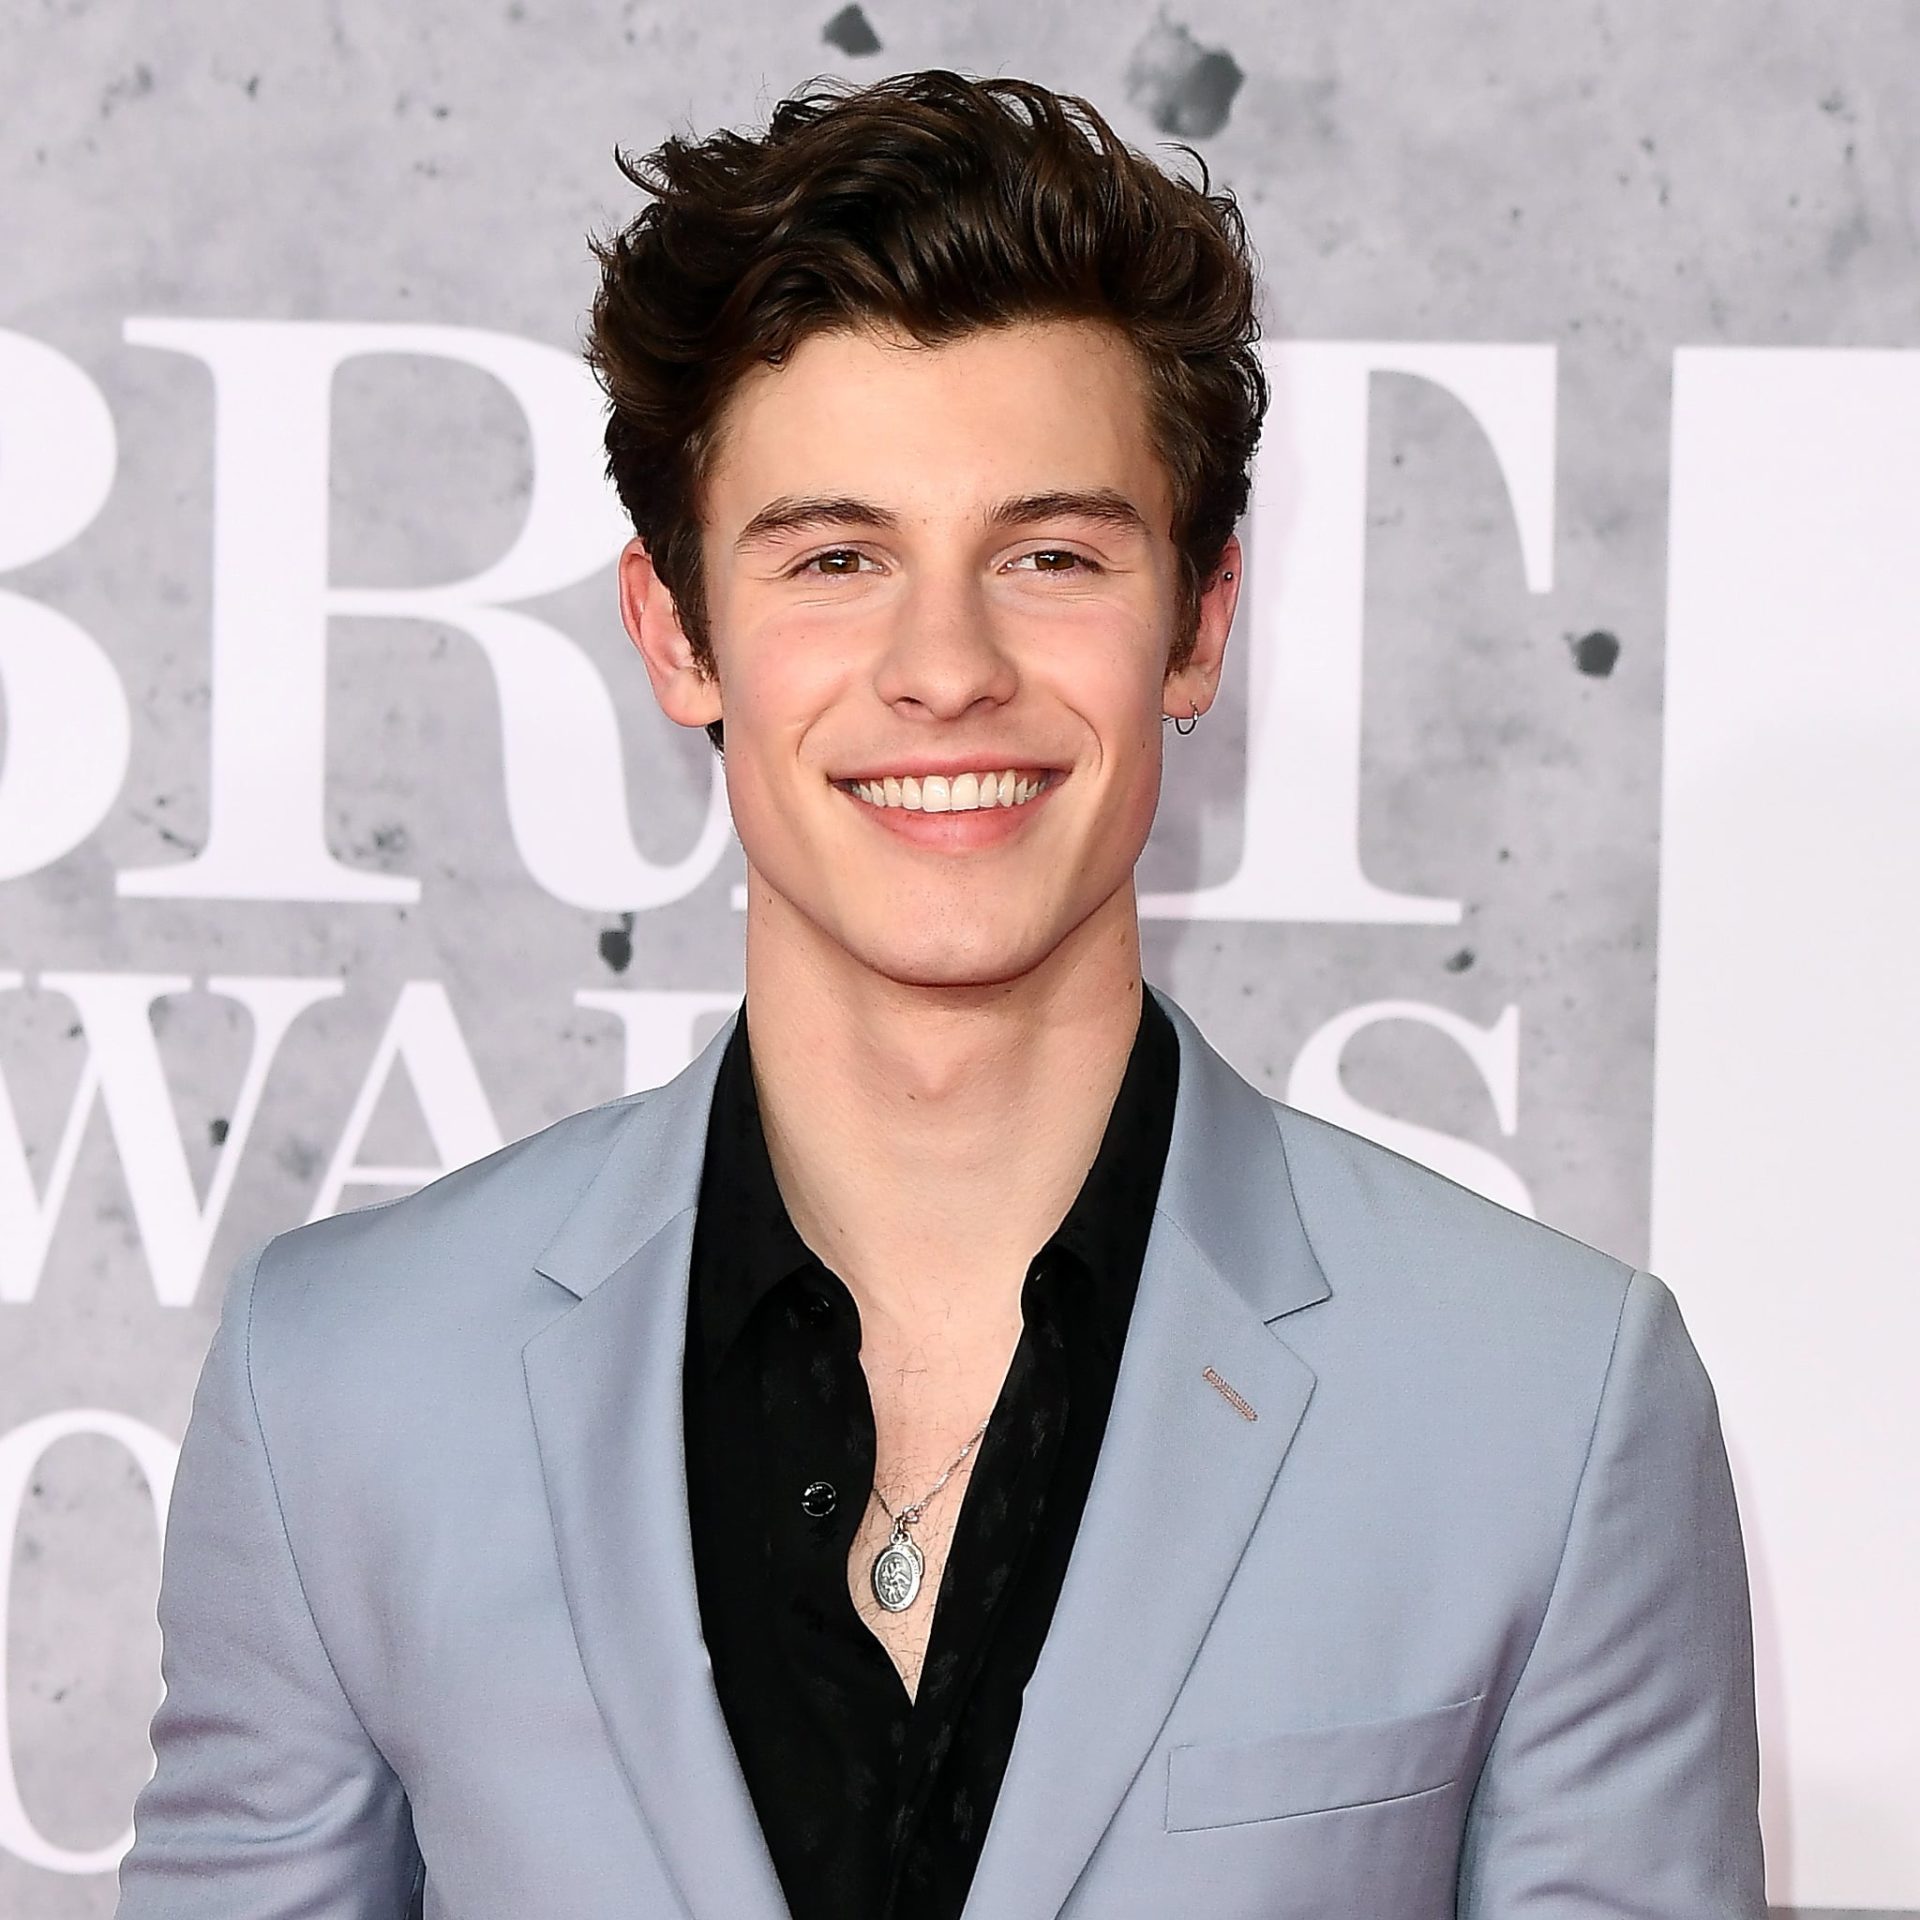 Shawn Mendes 2019 Wallpapers - Wallpaper Cave